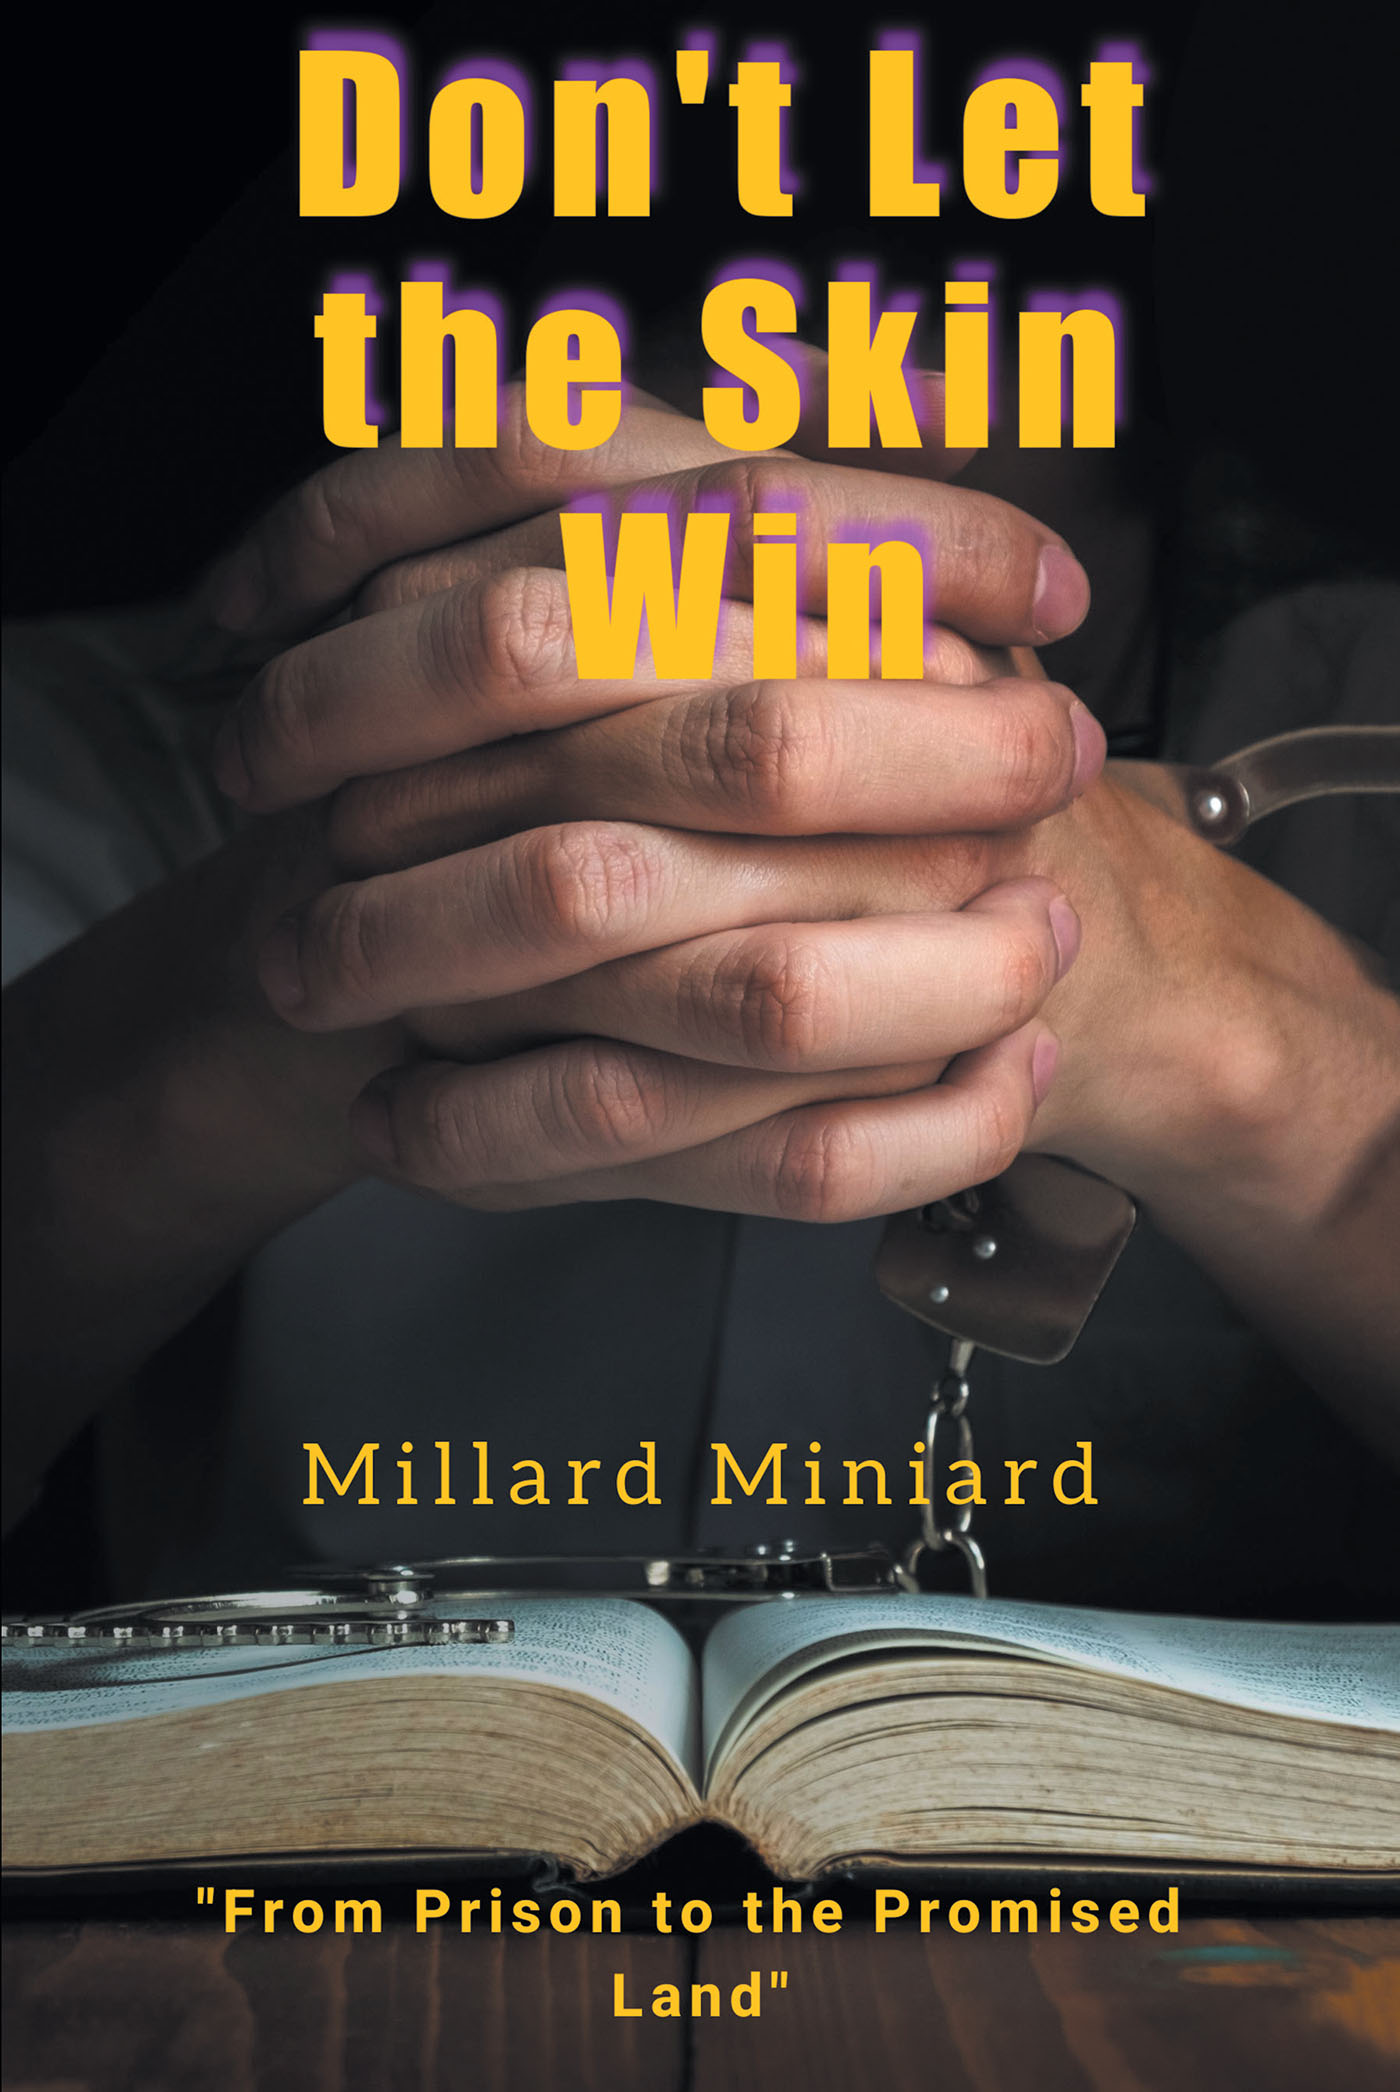 Author Millard Miniard’s New Book, "Don't Let the Skin Win," is the True Story of How the Author Found His Calling to Spread the Lord's Messages While Incarcerated